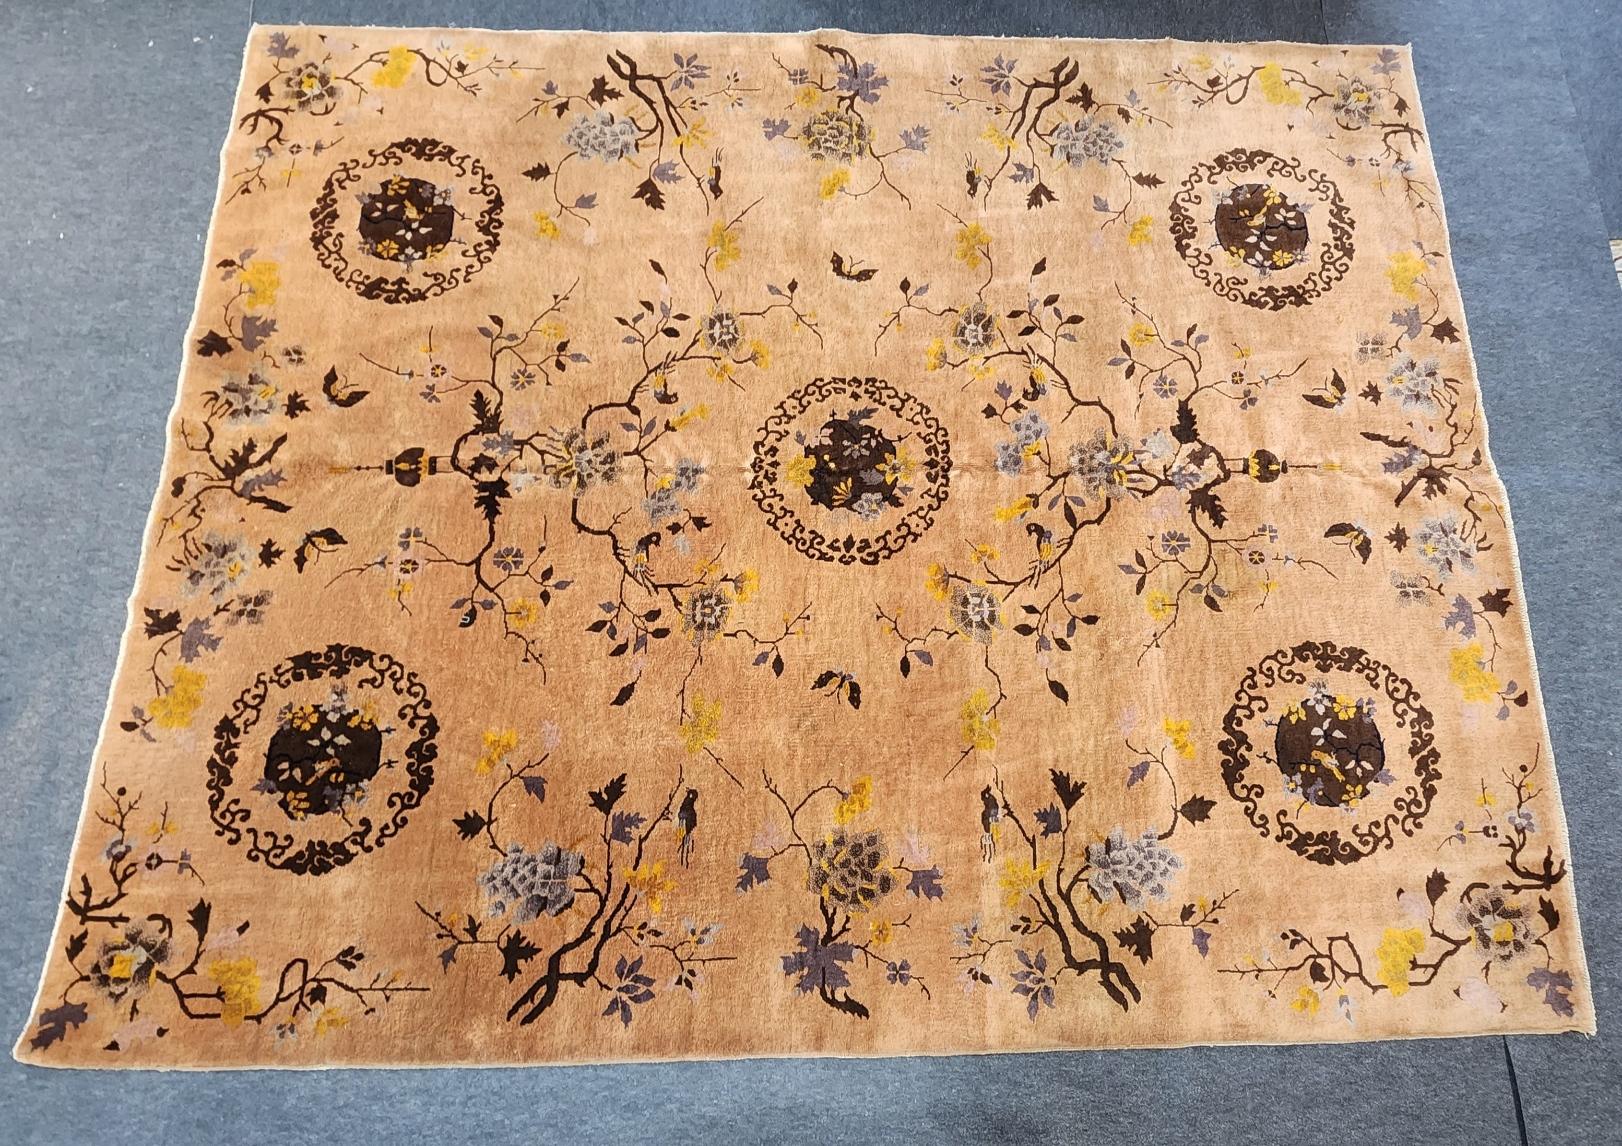 Early 20th Century Art Deco Peking Rug 8x9.8 Excellent Condition Full pile In Excellent Condition For Sale In Los Angeles, CA